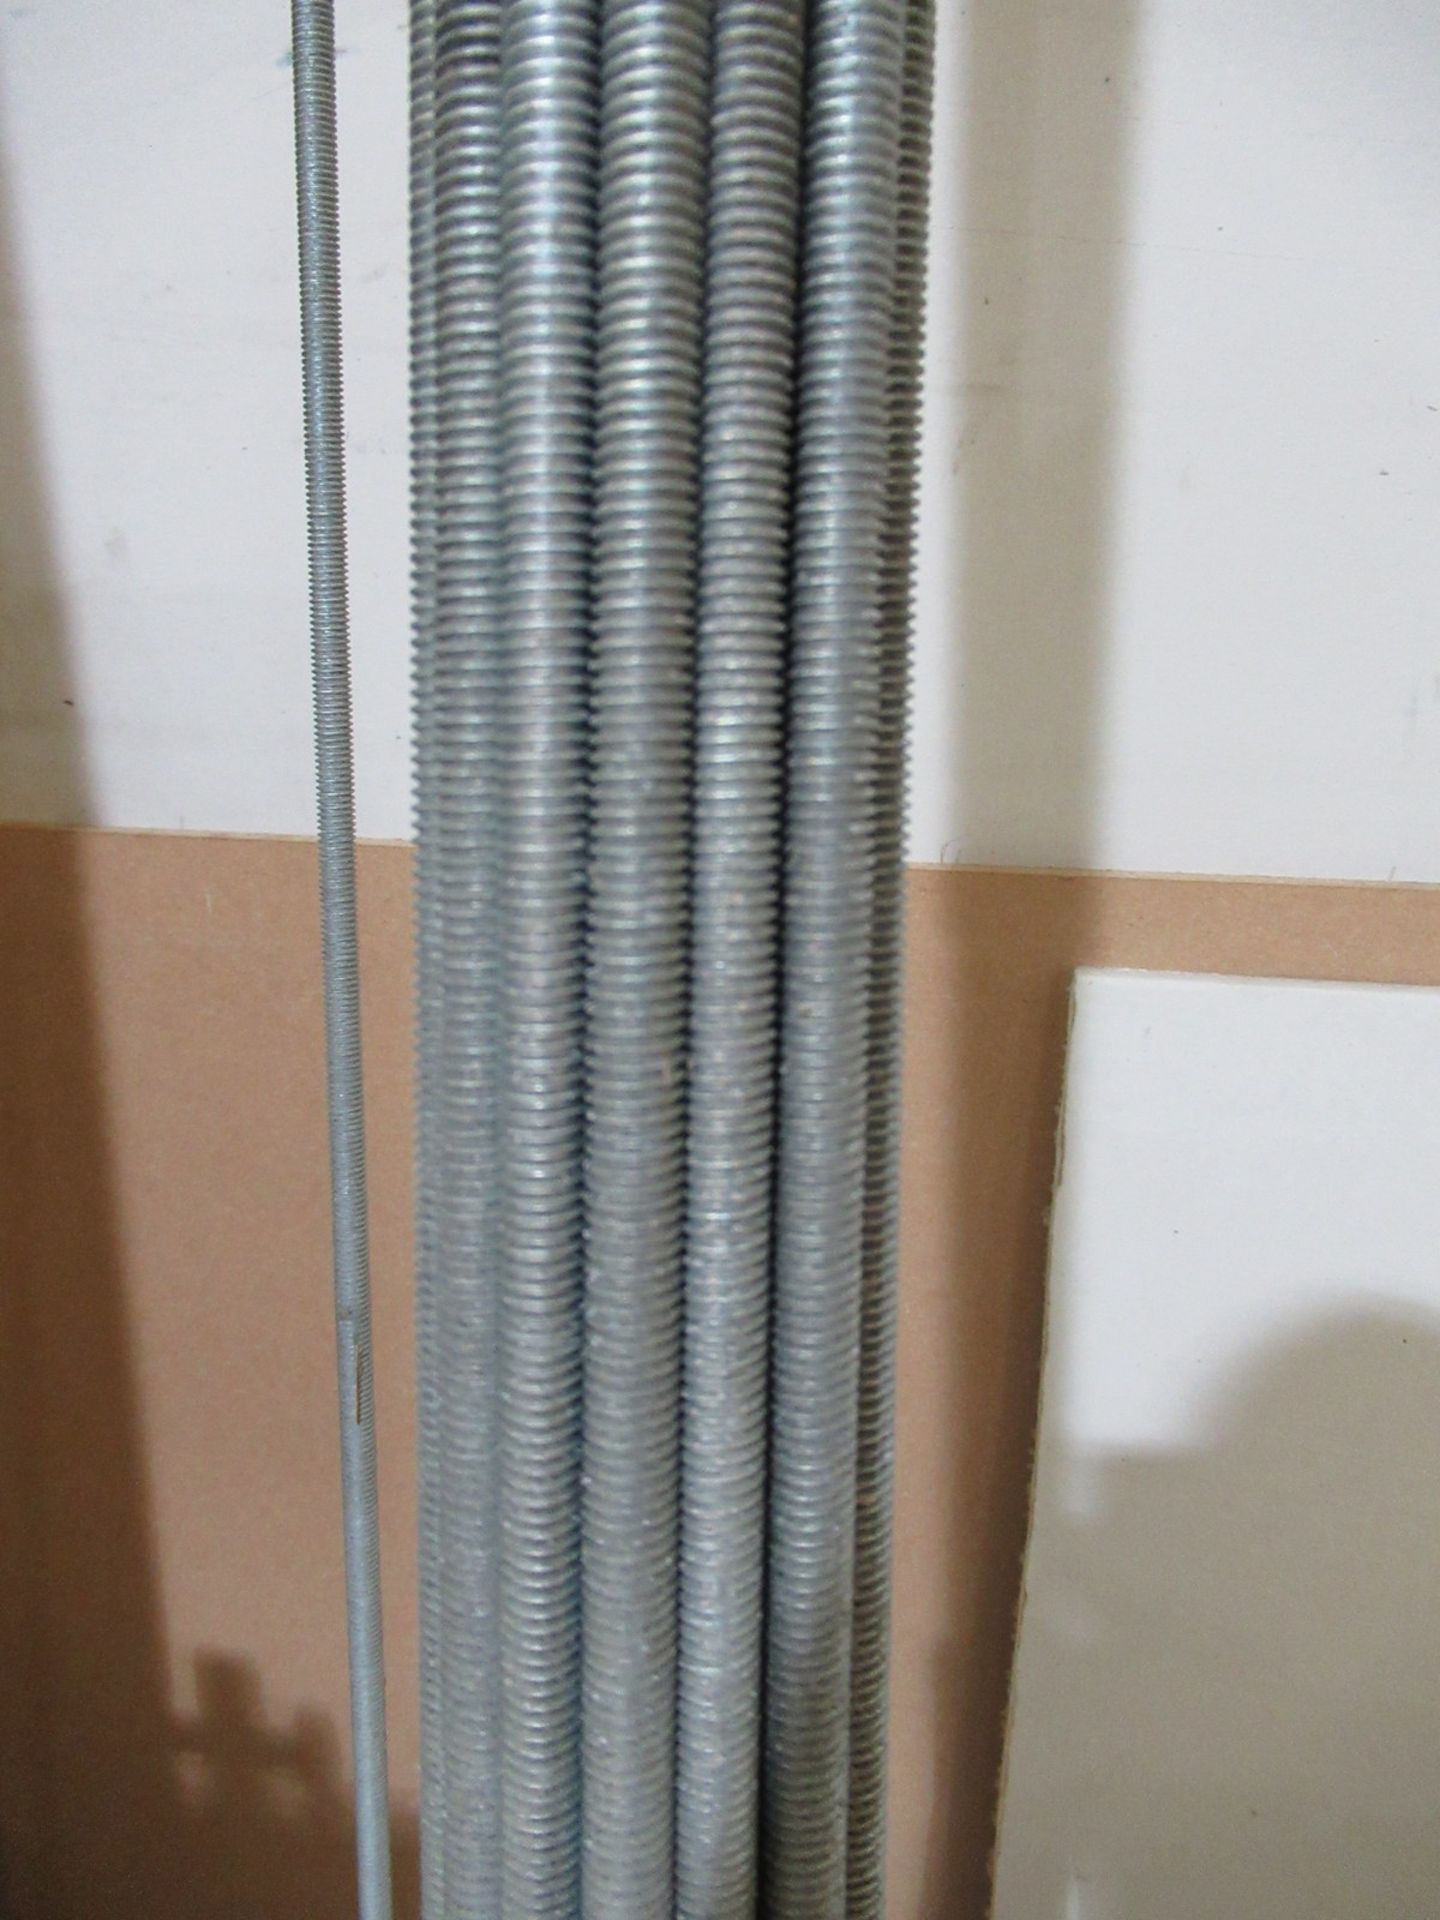 All Thread 1/8" 16 Gauge 10 ft - Image 2 of 2